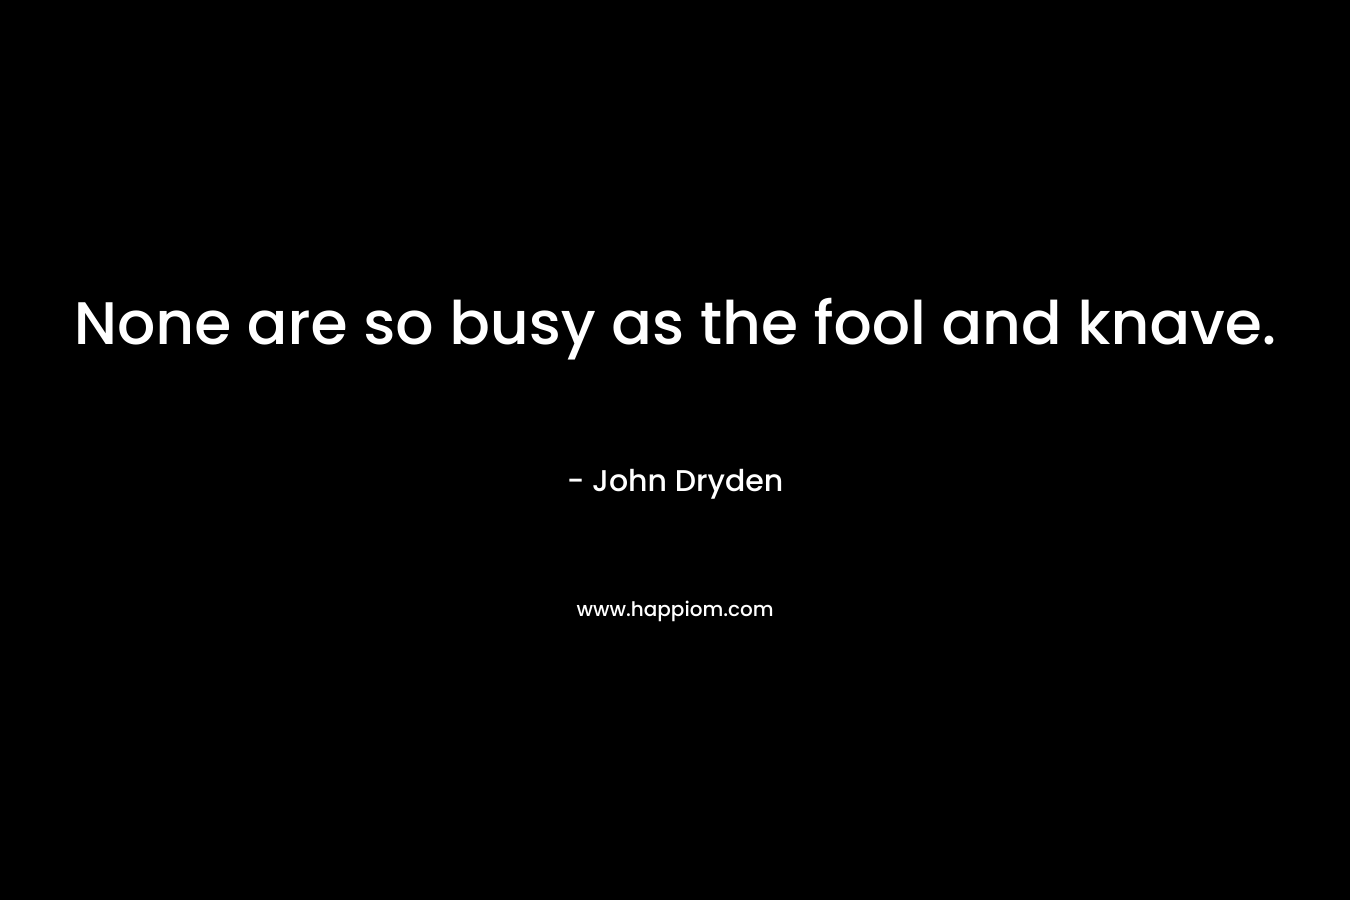 None are so busy as the fool and knave. – John Dryden